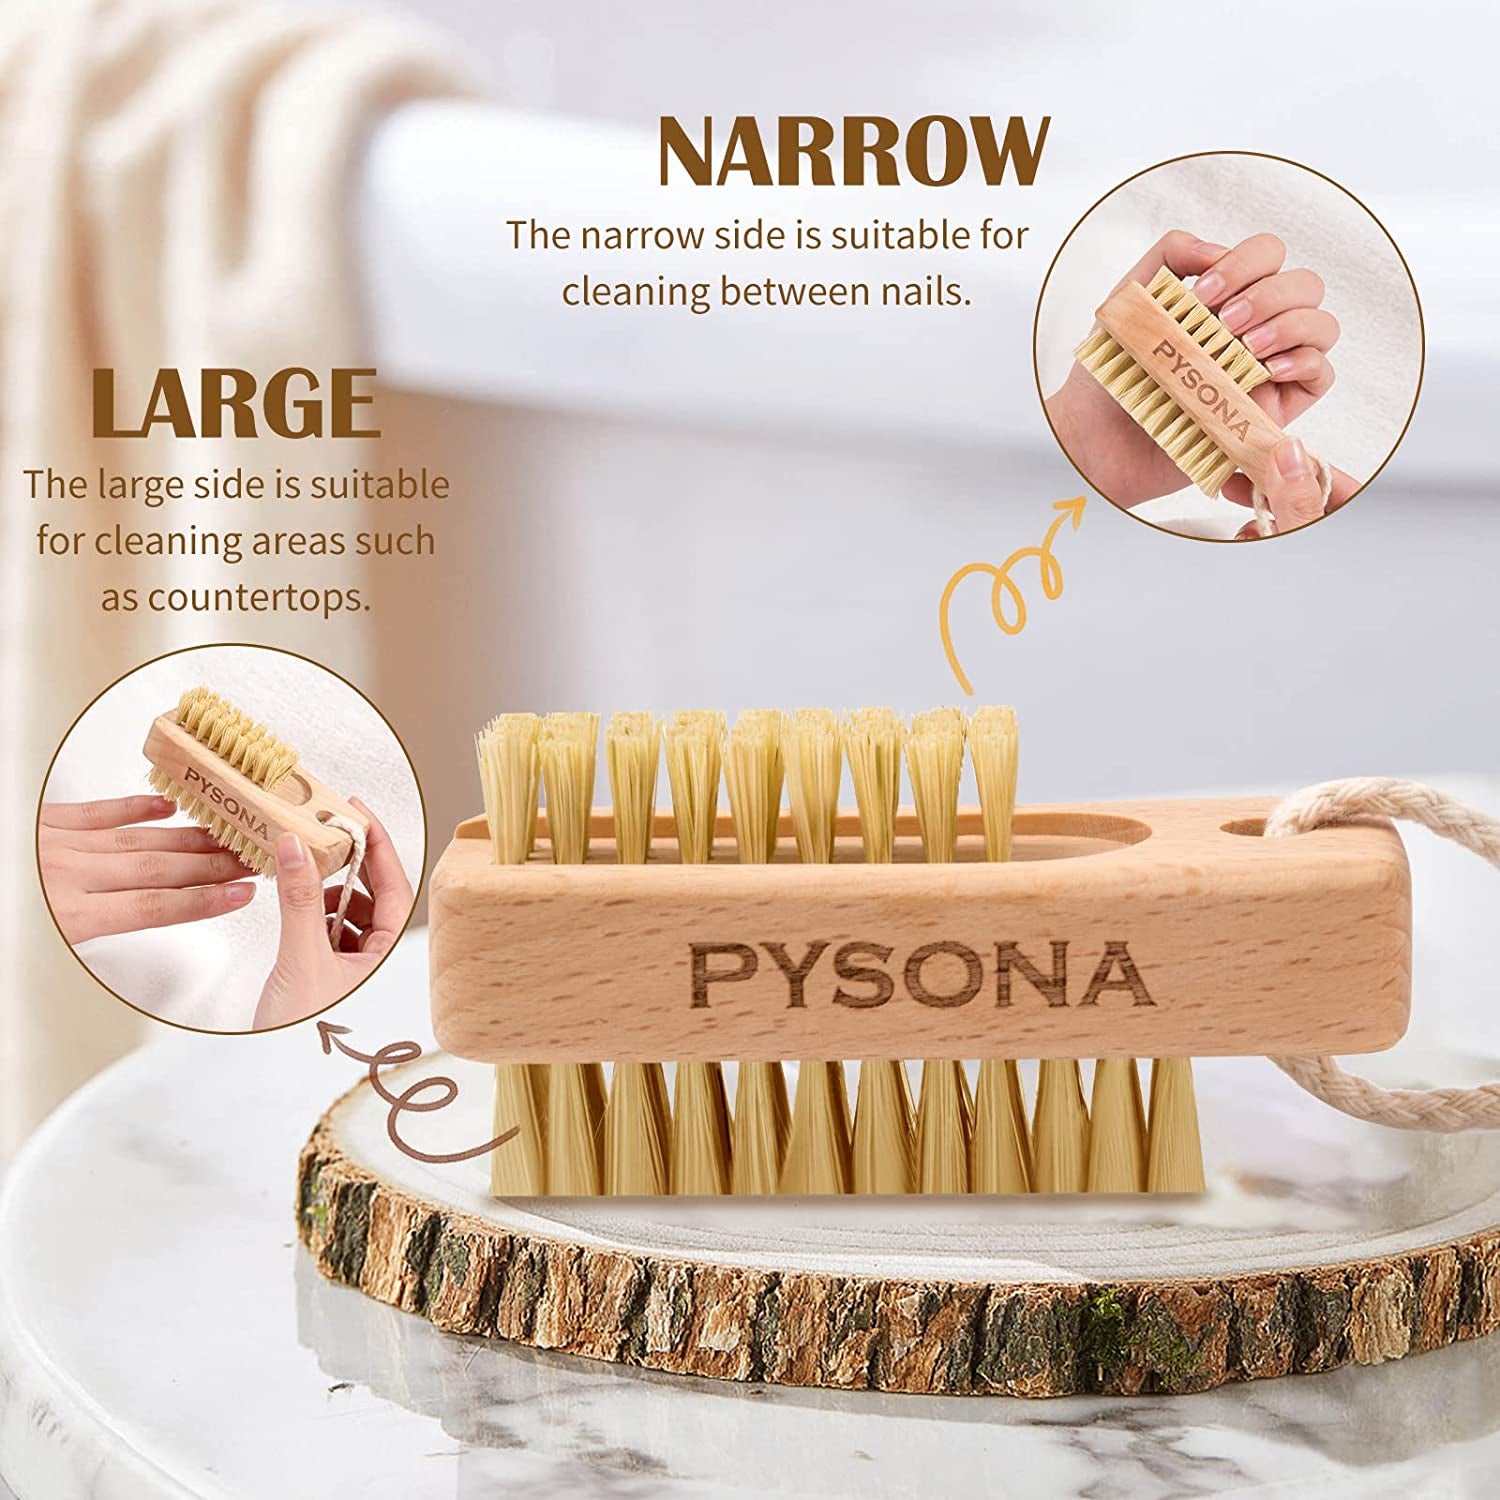 2 Pieces Natural Wooden Bristle Nail Brushes for Cleaning Fingernail and Toenail Non-Slip Two-Sided Grip Hand Foot Nail Brush Set Manicure Pedicure Scrubber Supply Men Women Girls